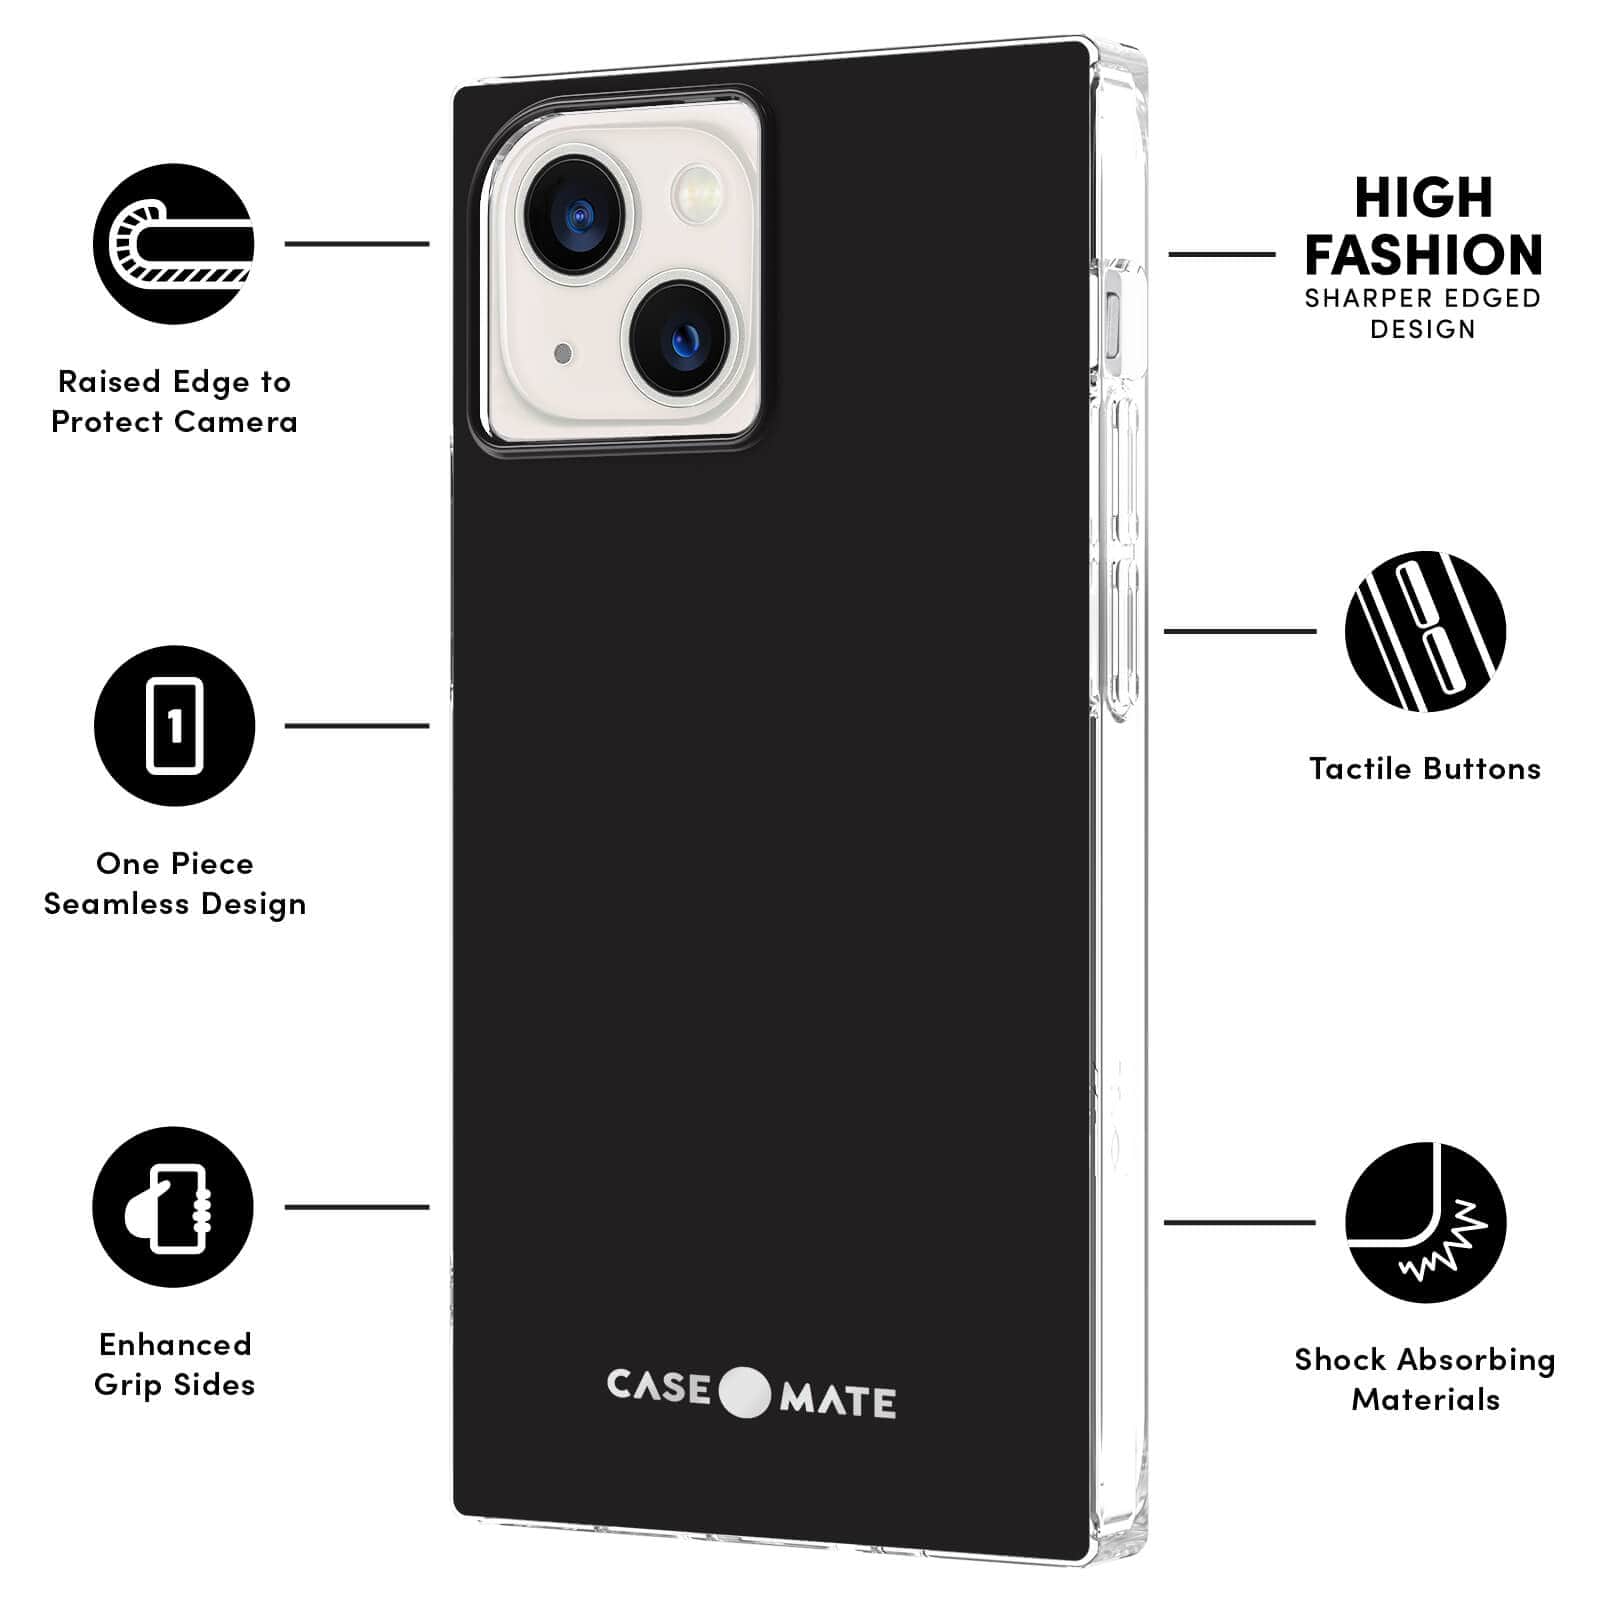 FEATURES: RAISED EDGE TO PROTECT CAMERA, ONE PIECE SEAMLESS DESIGN, ENHANCED GRIP SIDES, HIGH FASHION SHARPER EDGE DESIGN, TACTILE BUTTONS, SHOCK ABSORBING MATERIALS. COLOR::BLACK